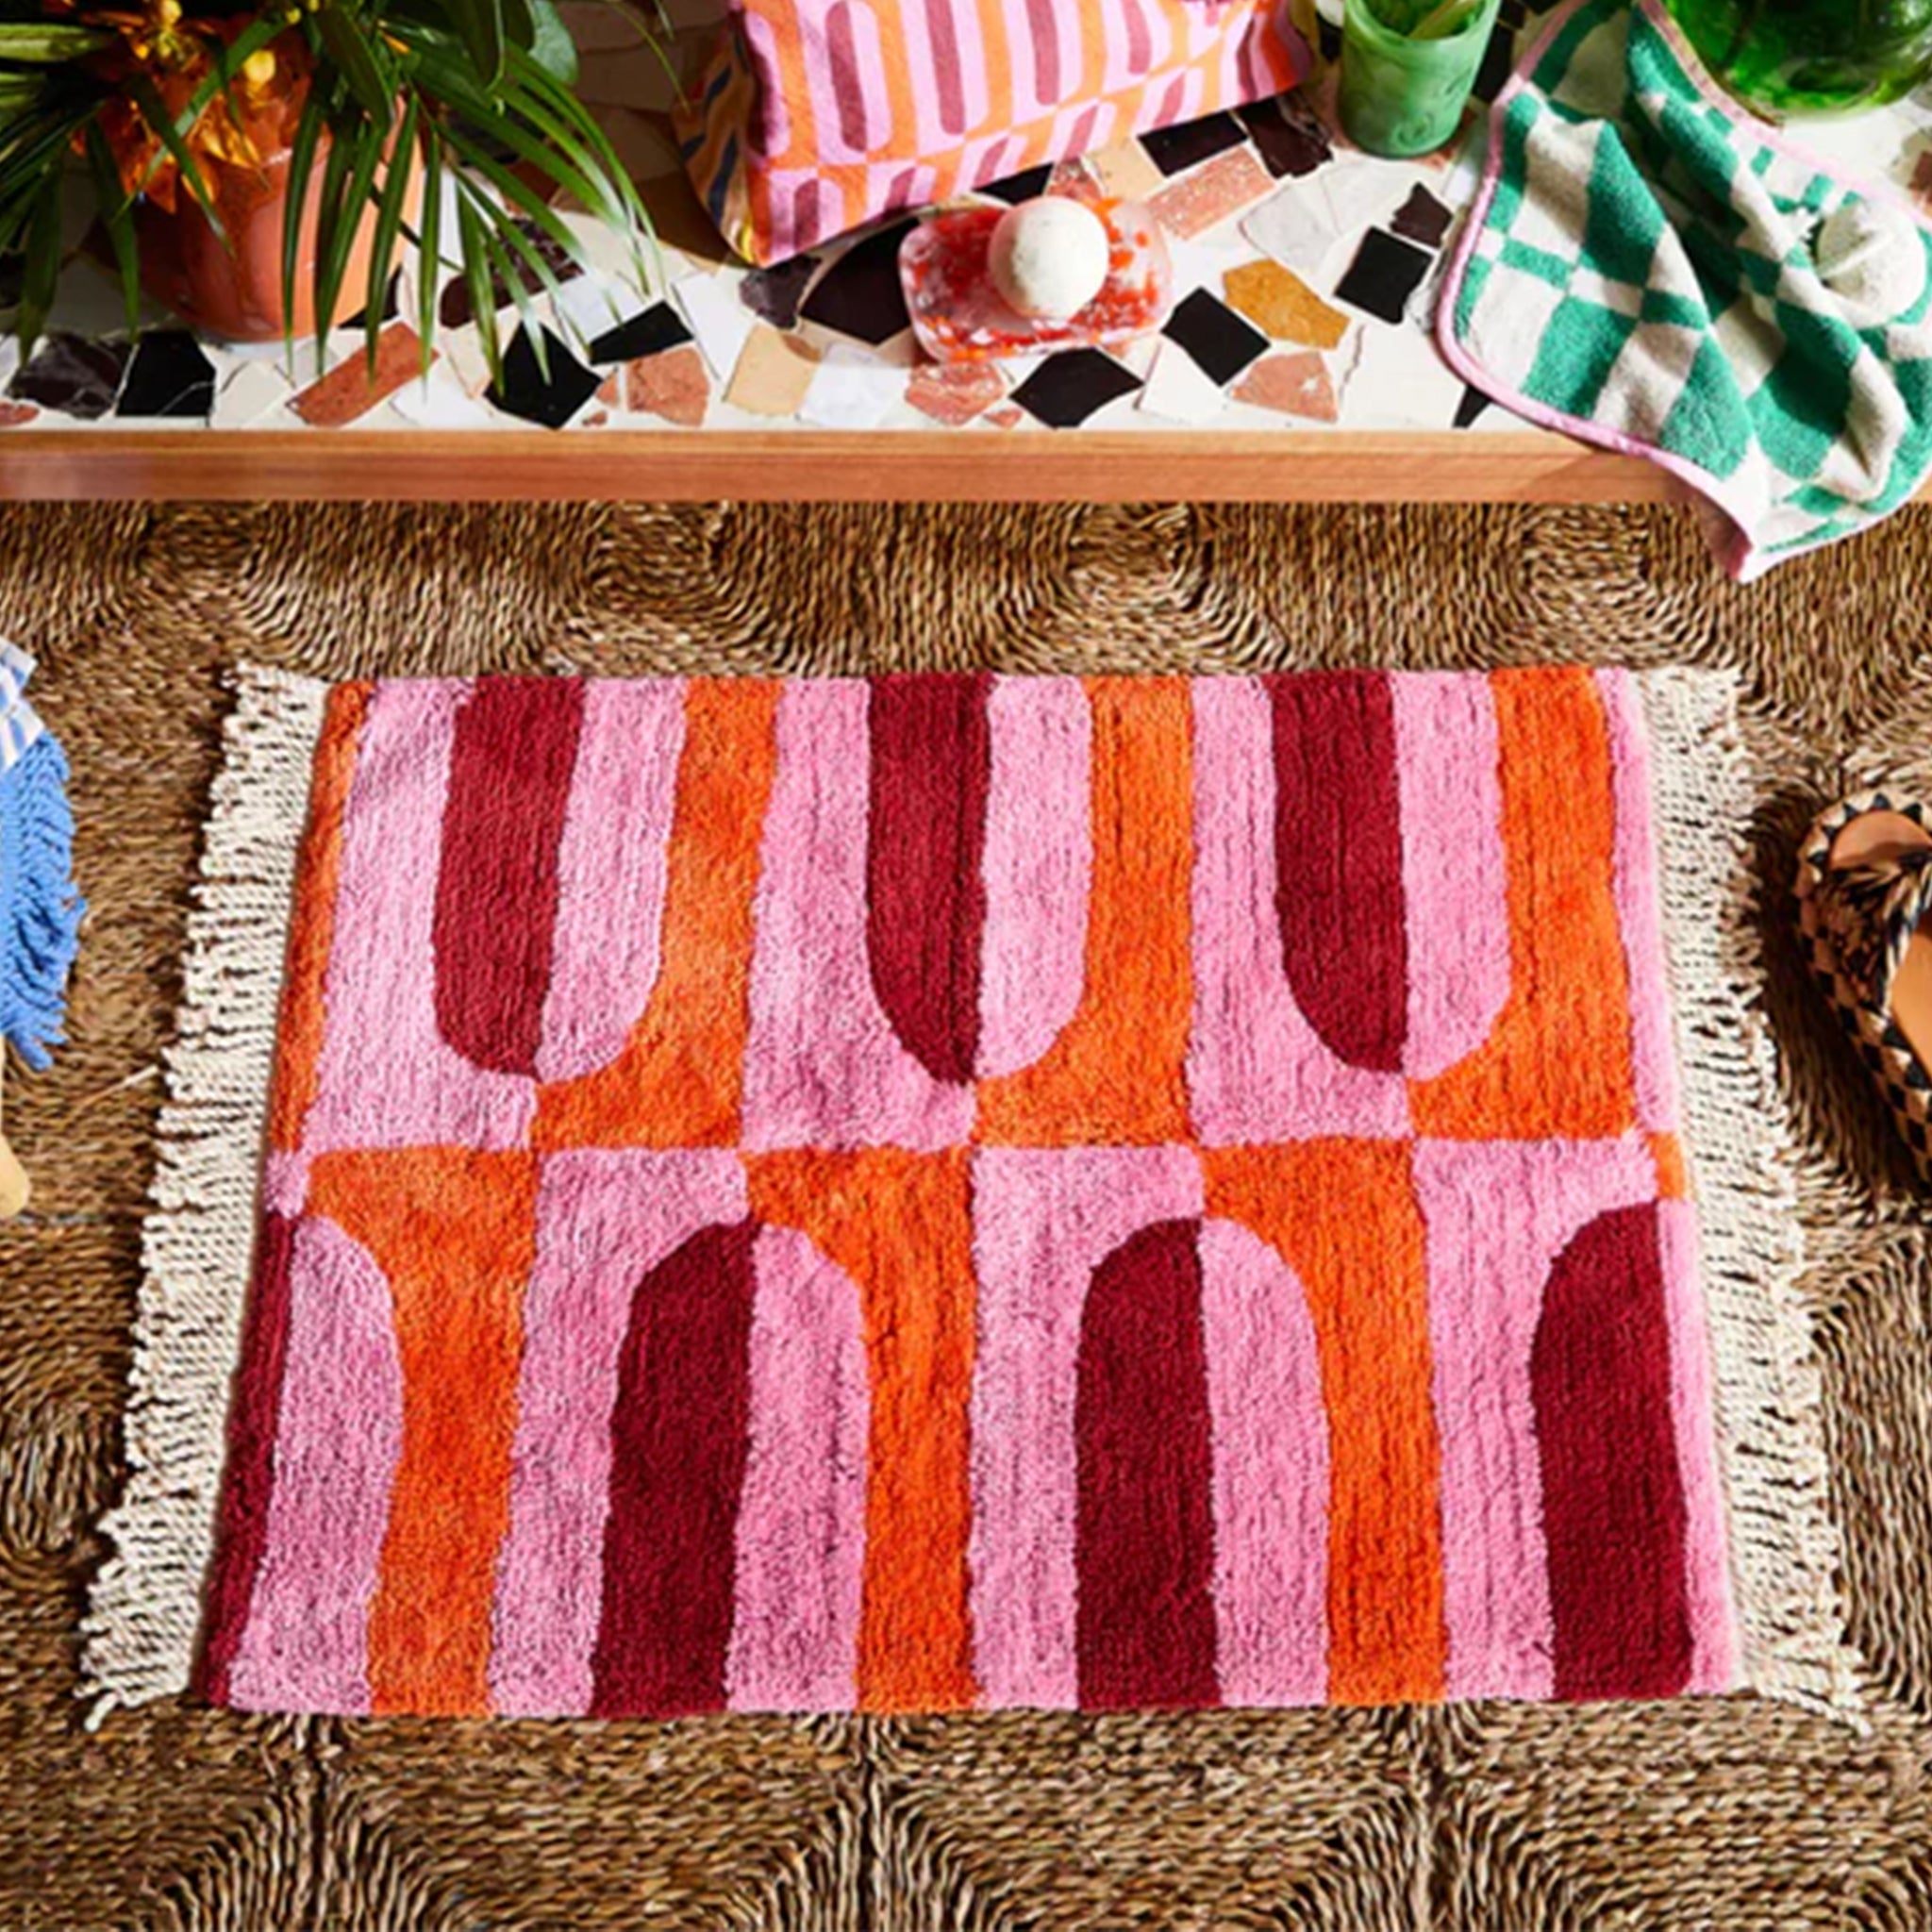 A pink, orange and red bath mat with a tassel detail on each end.